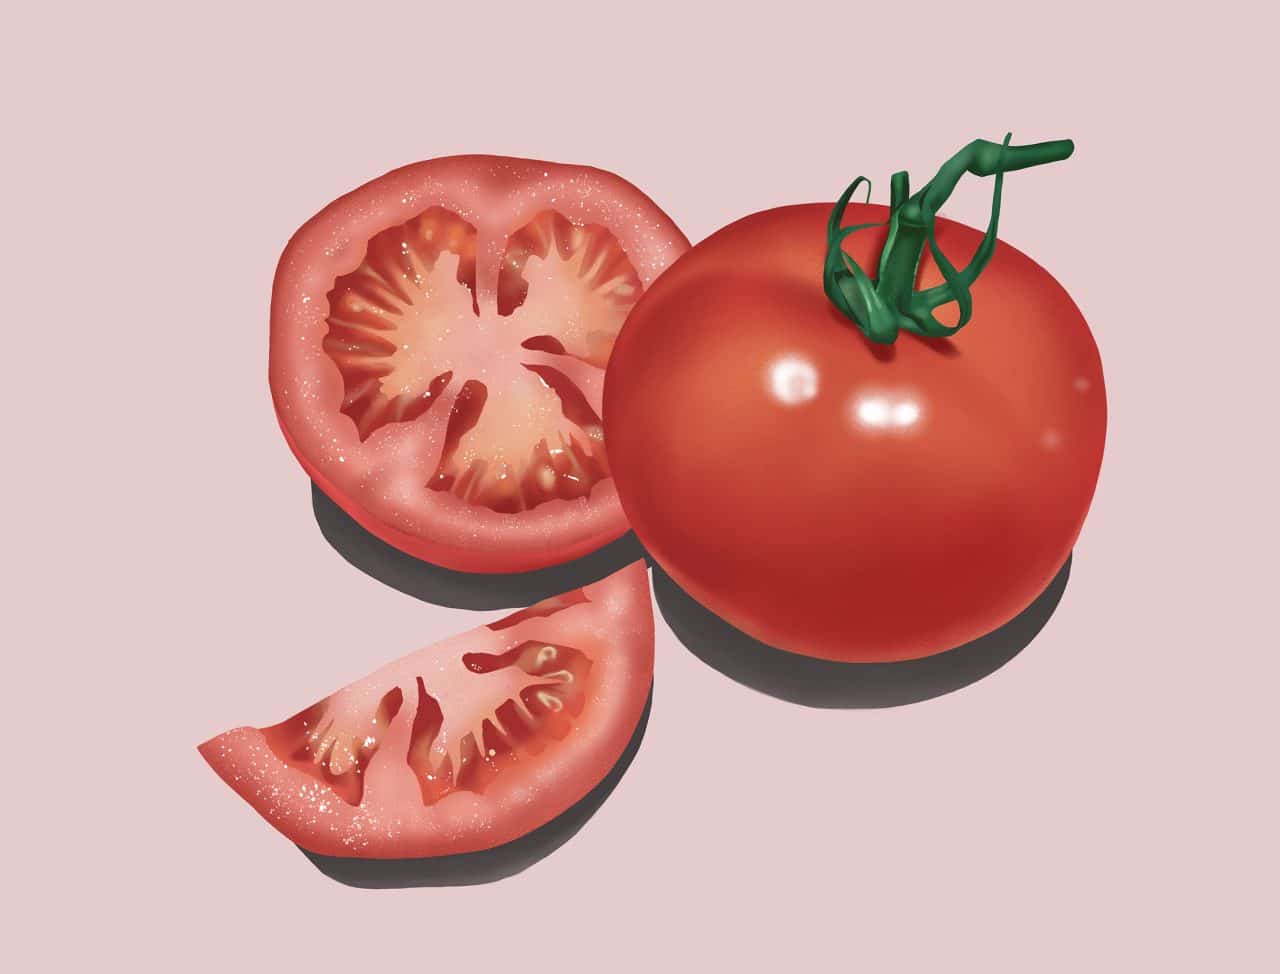 Now you're an expert on how to make a realistic tomato drawing!